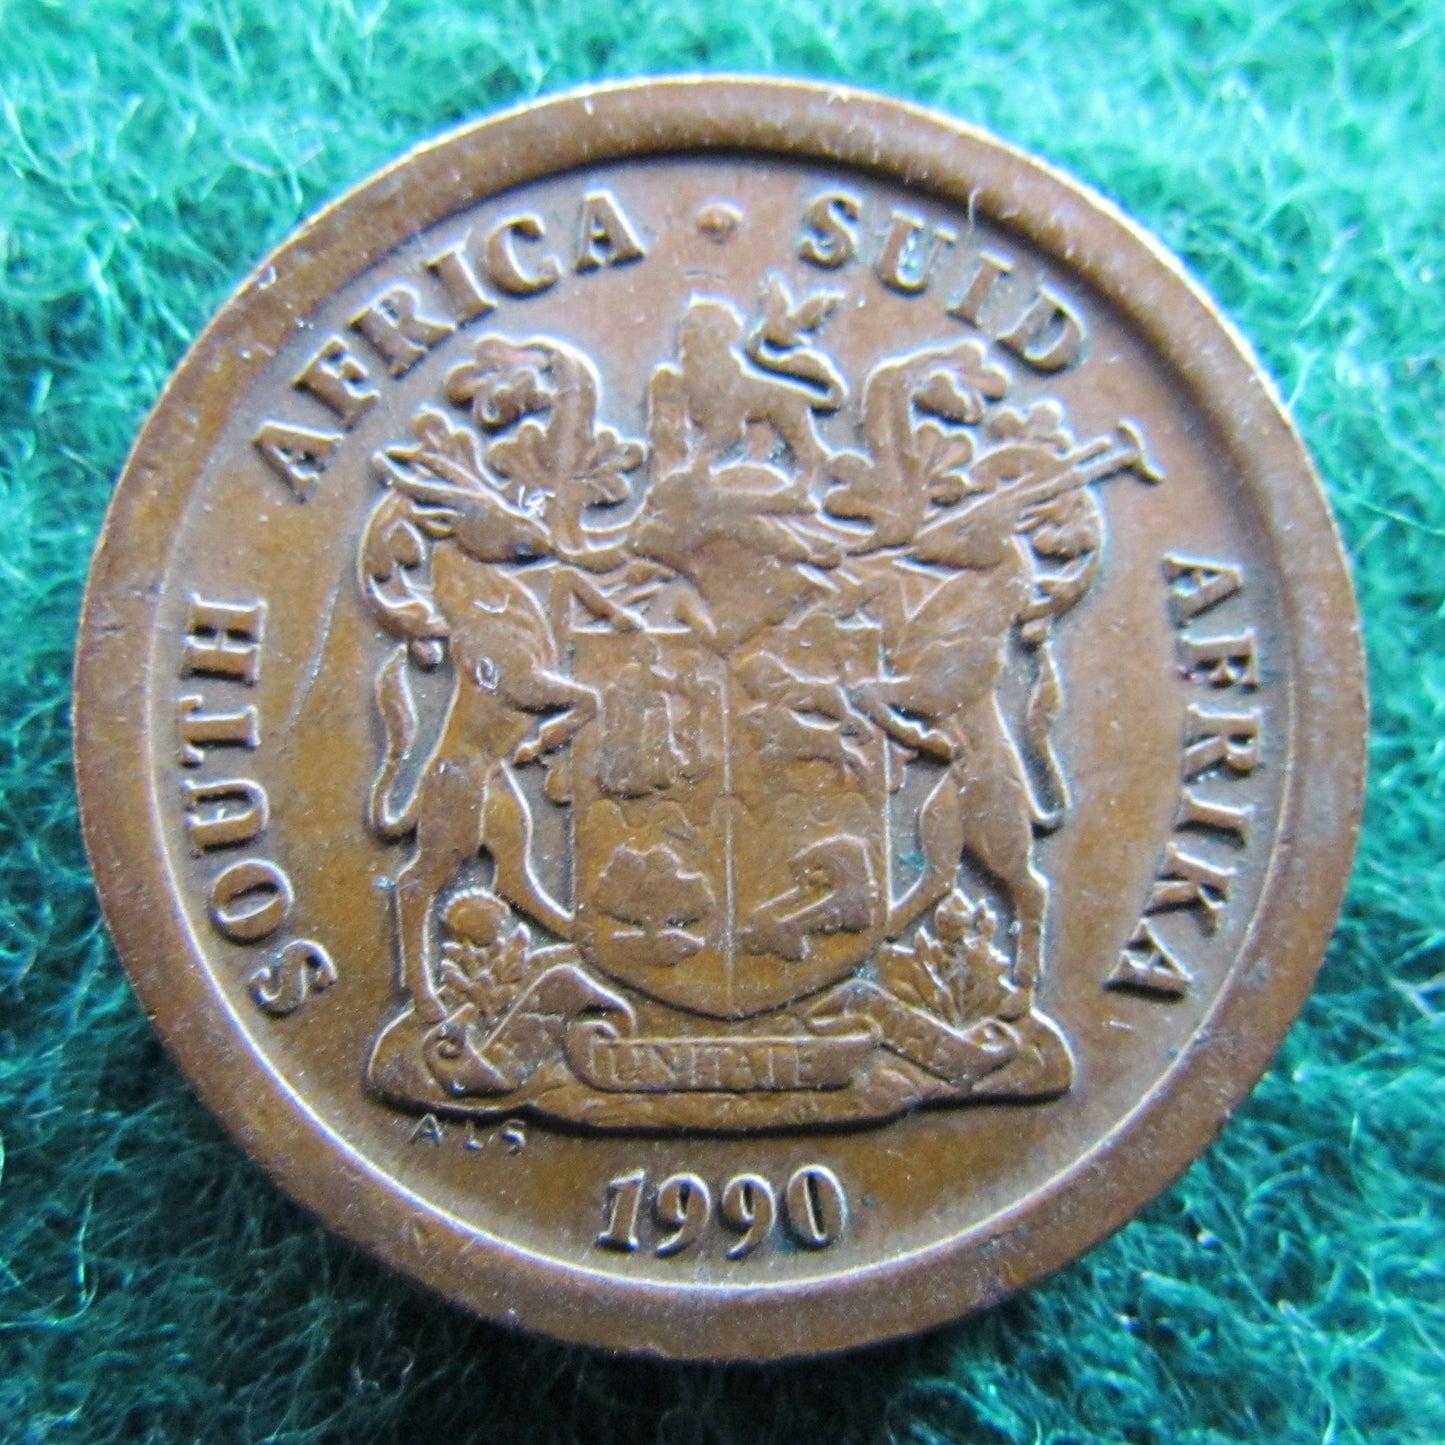 South Africa 1990 5 Cent Coin